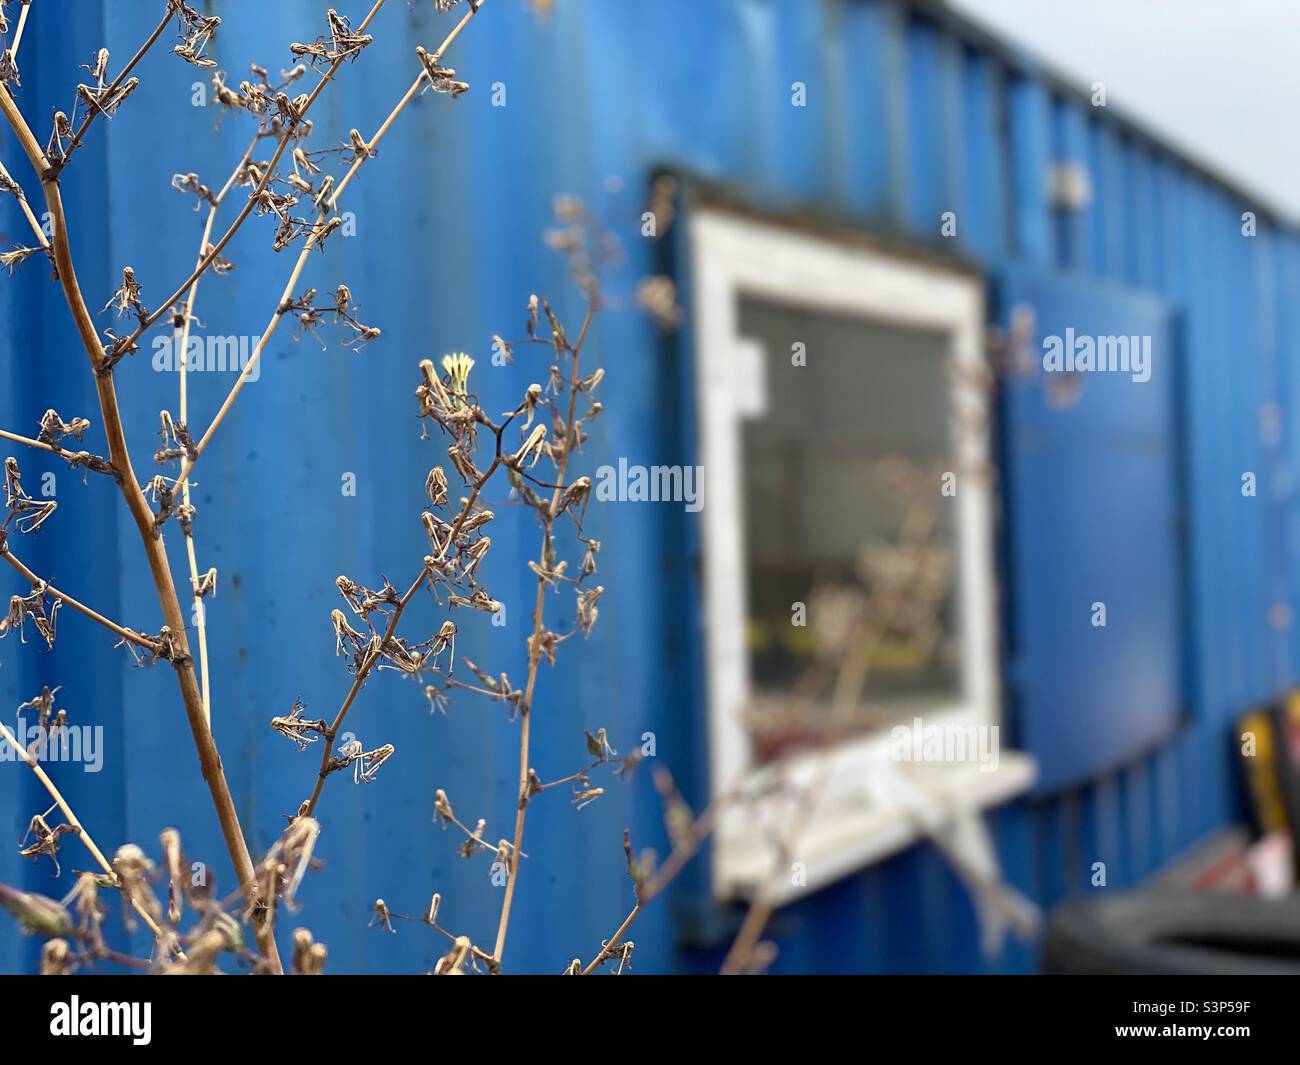 Dried wild plant in front of blue container Stock Photo